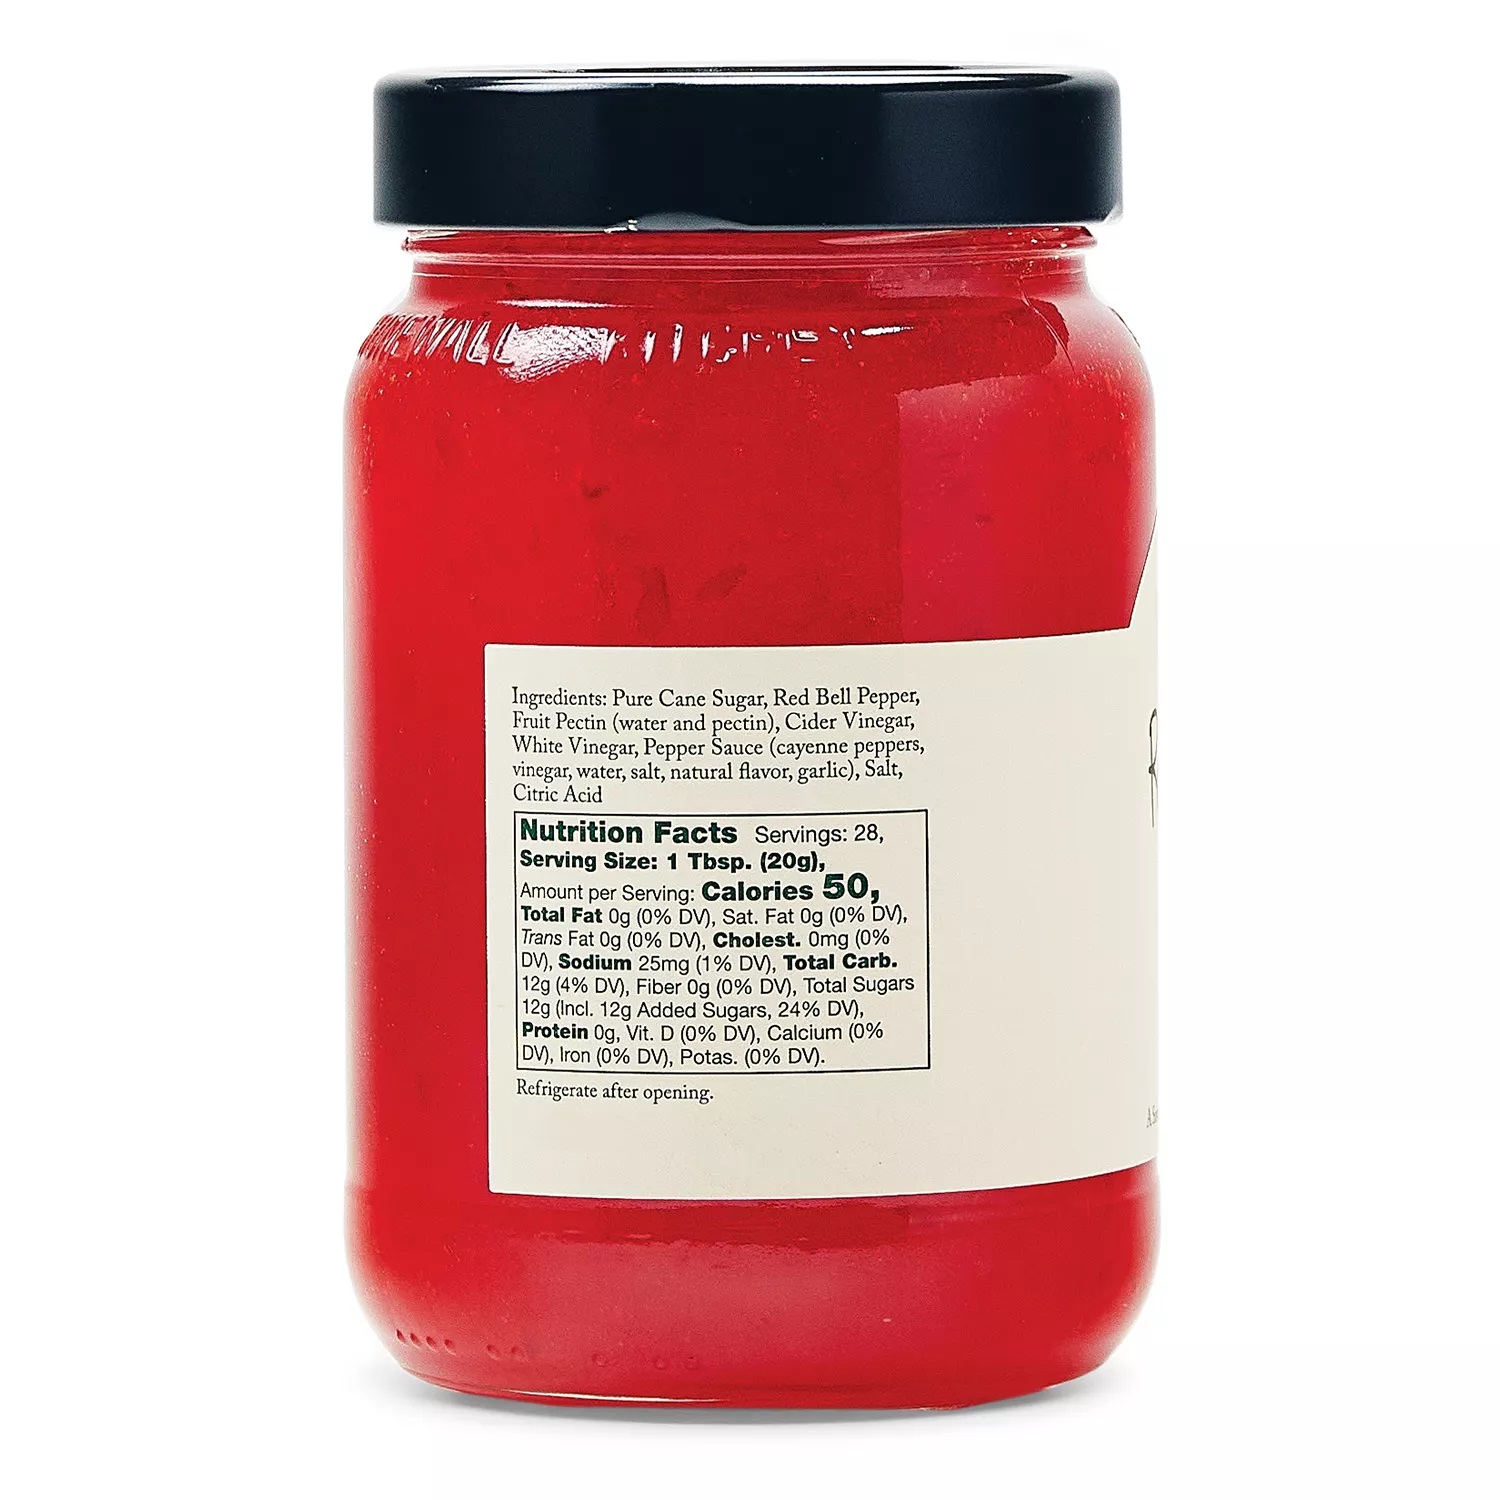 Stonewall Kitchen Red Pepper Jelly (20 Ounce)